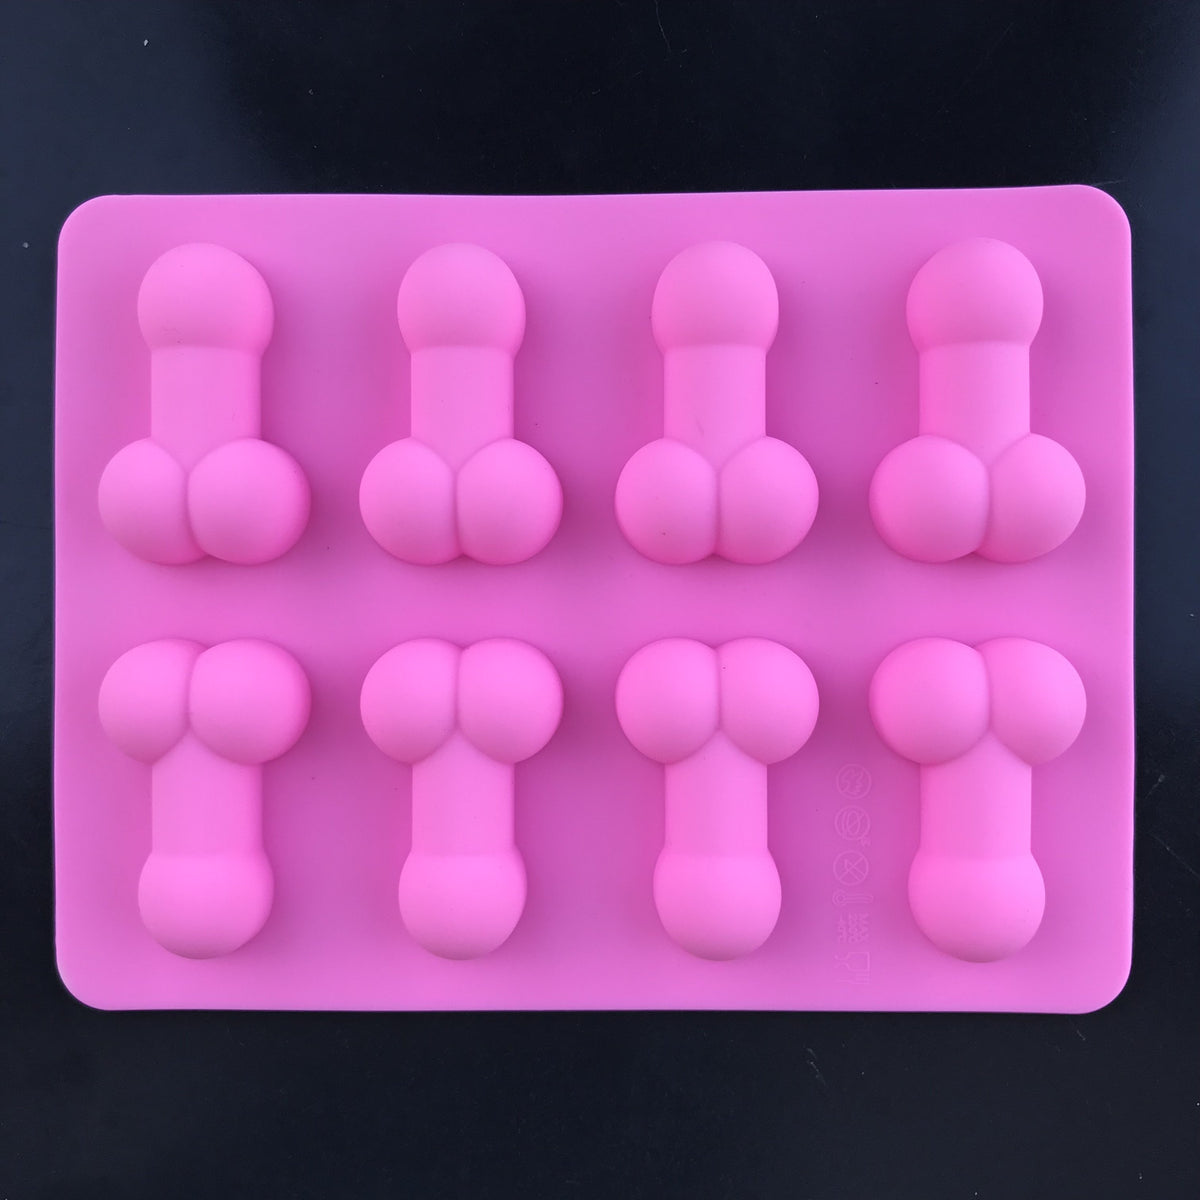  Silicone Penis Mold, Penis Soap Mold, Adult Theme